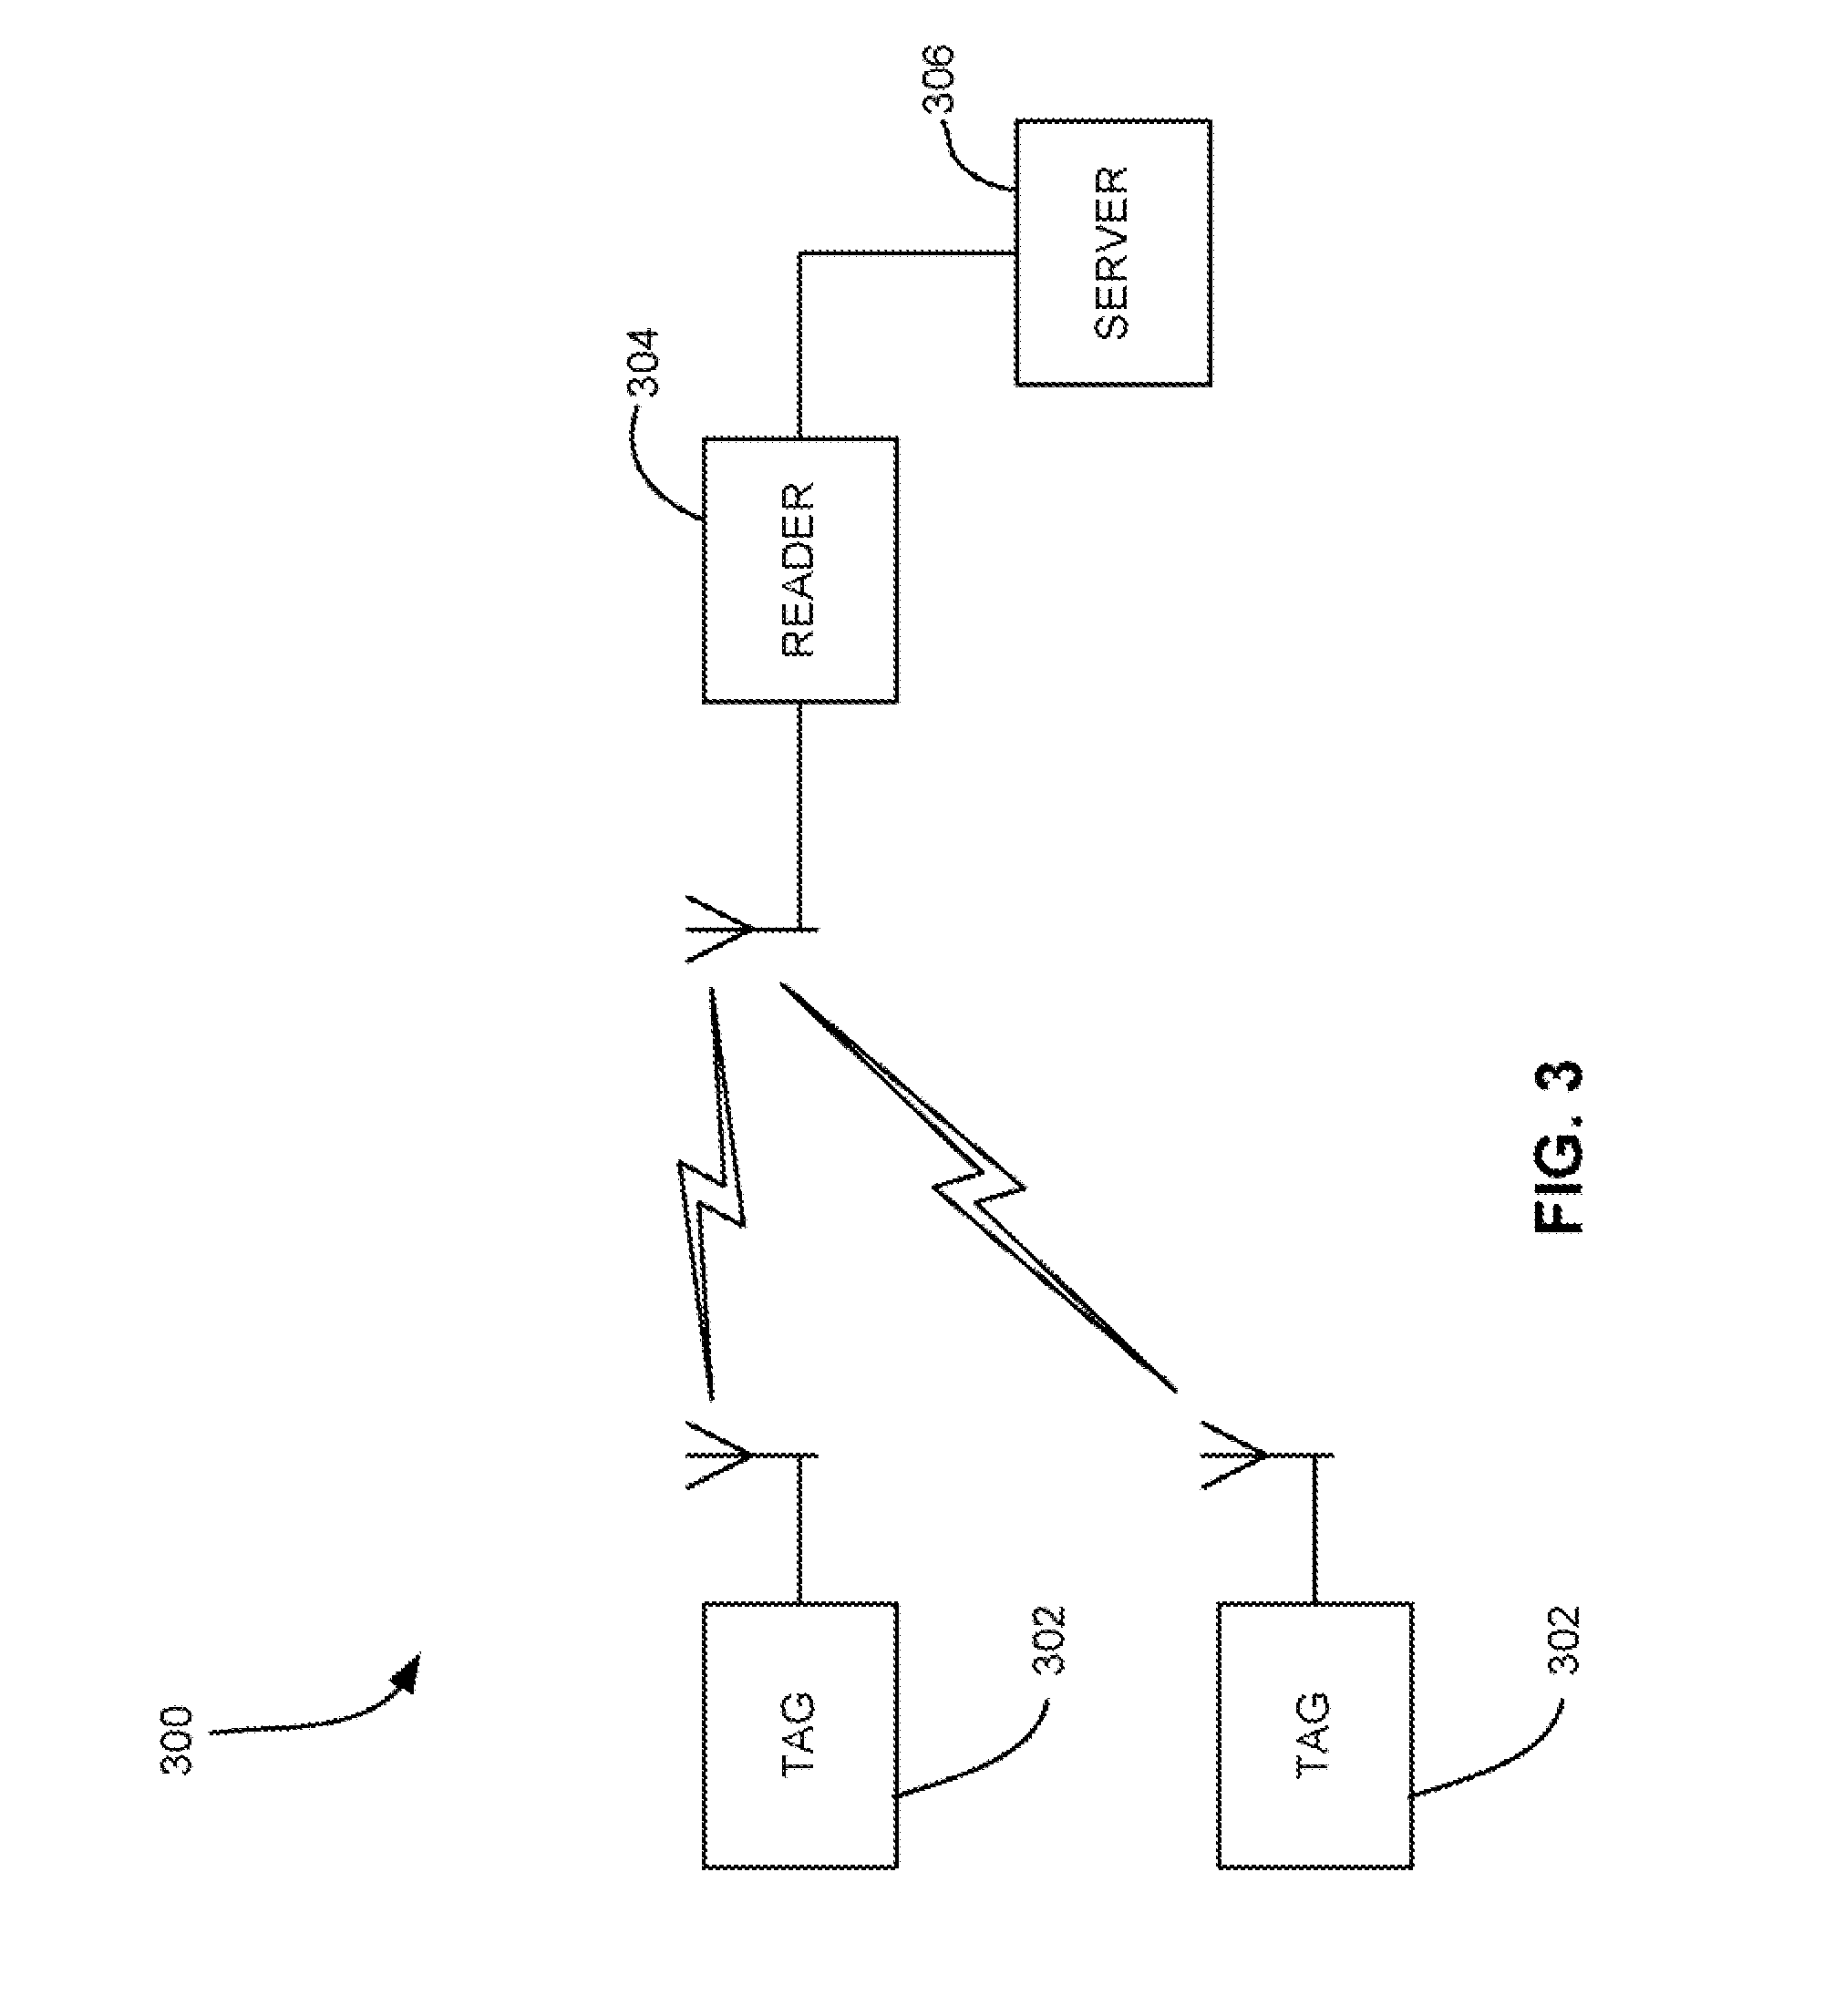 Fully differential amplifier with continuous-time offset reduction